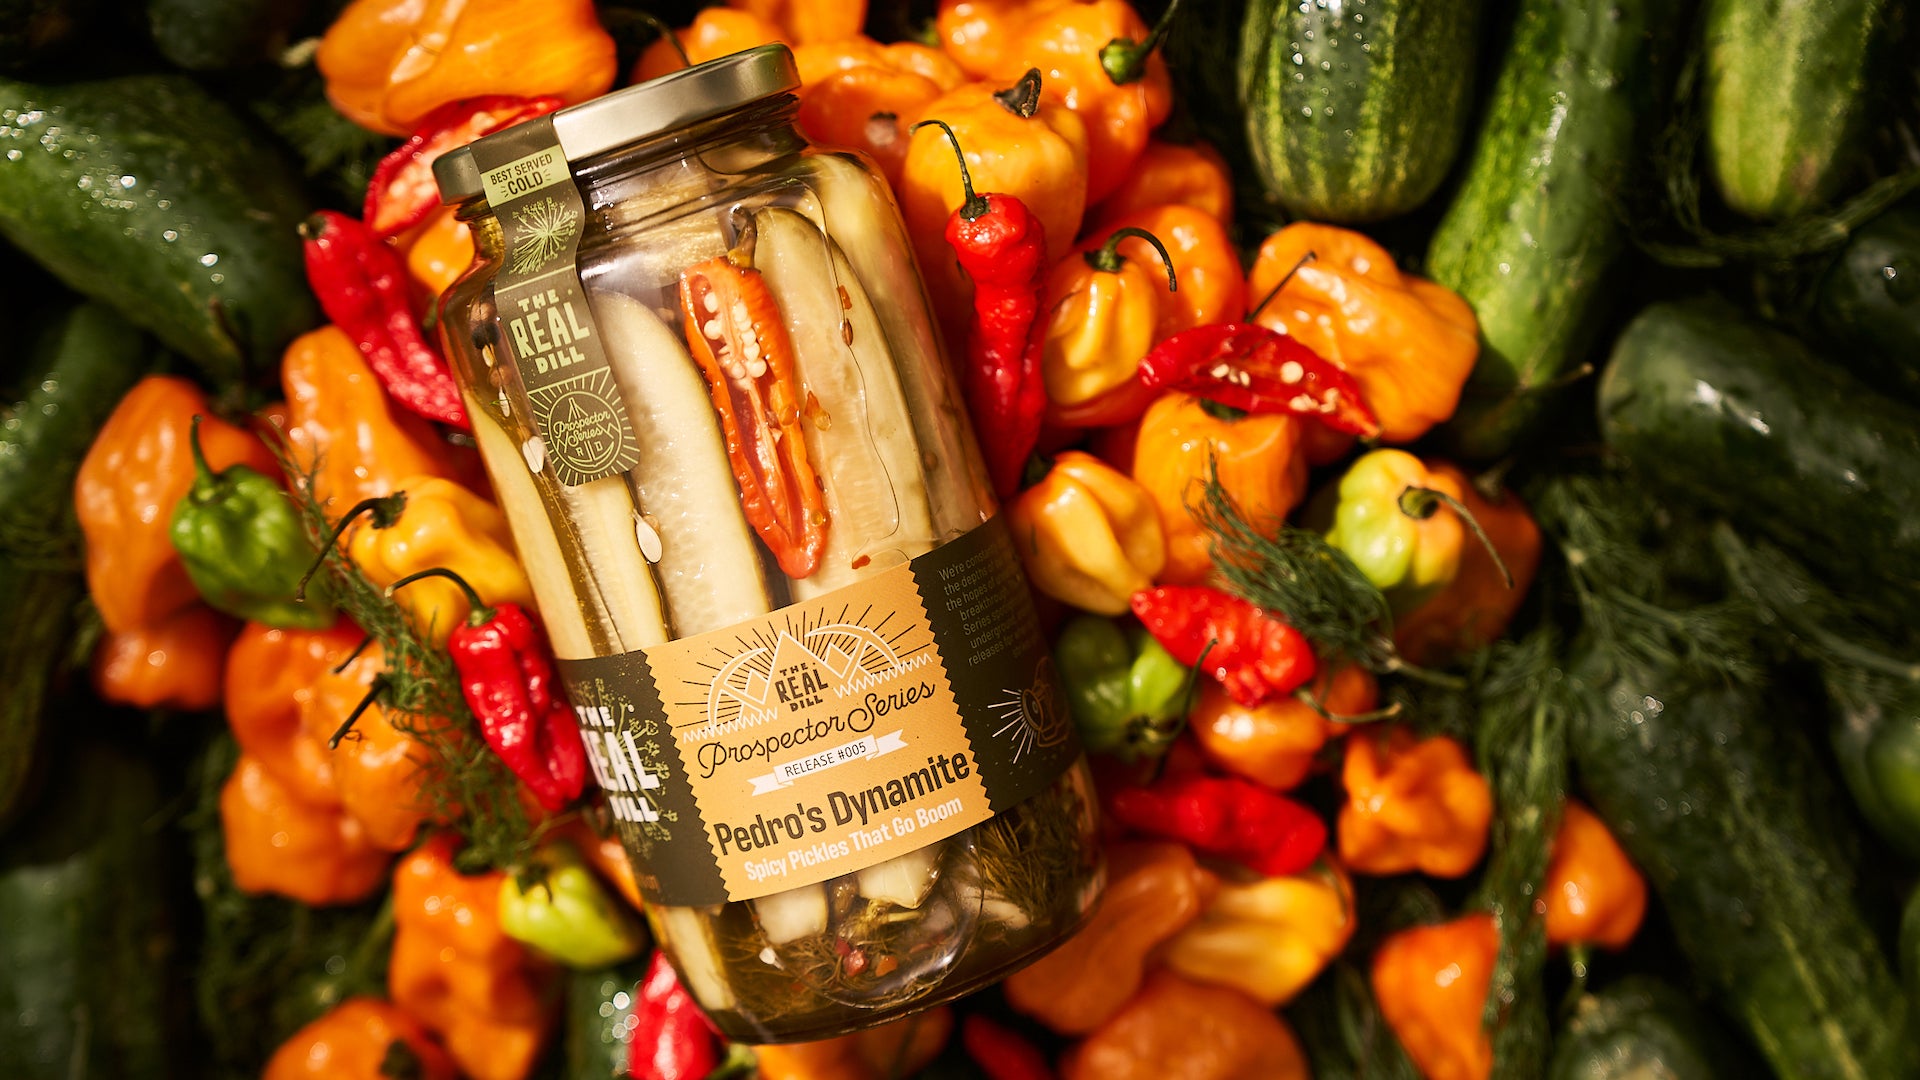 Strike Gold: The Prospector Series Featuring Pedro's Dynamite Pickles